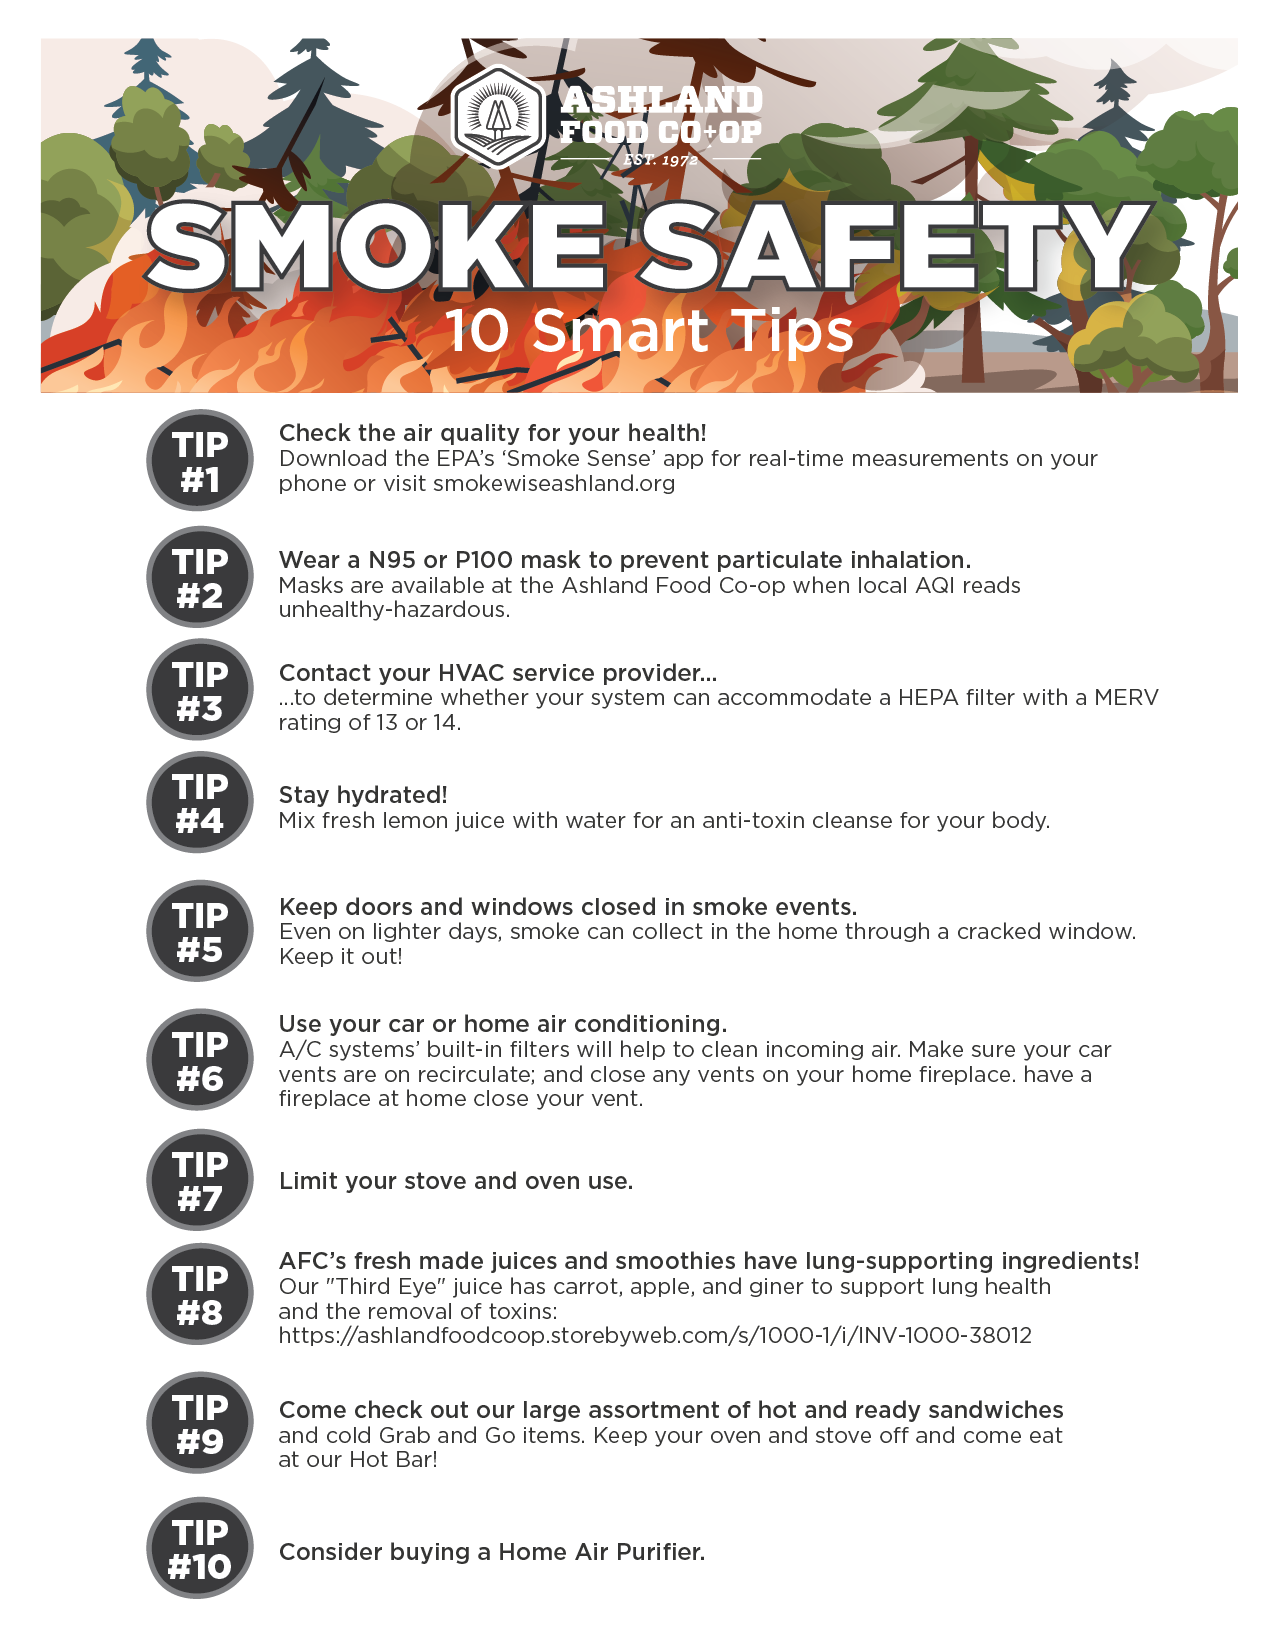 10 smart tips for Smoke Safety